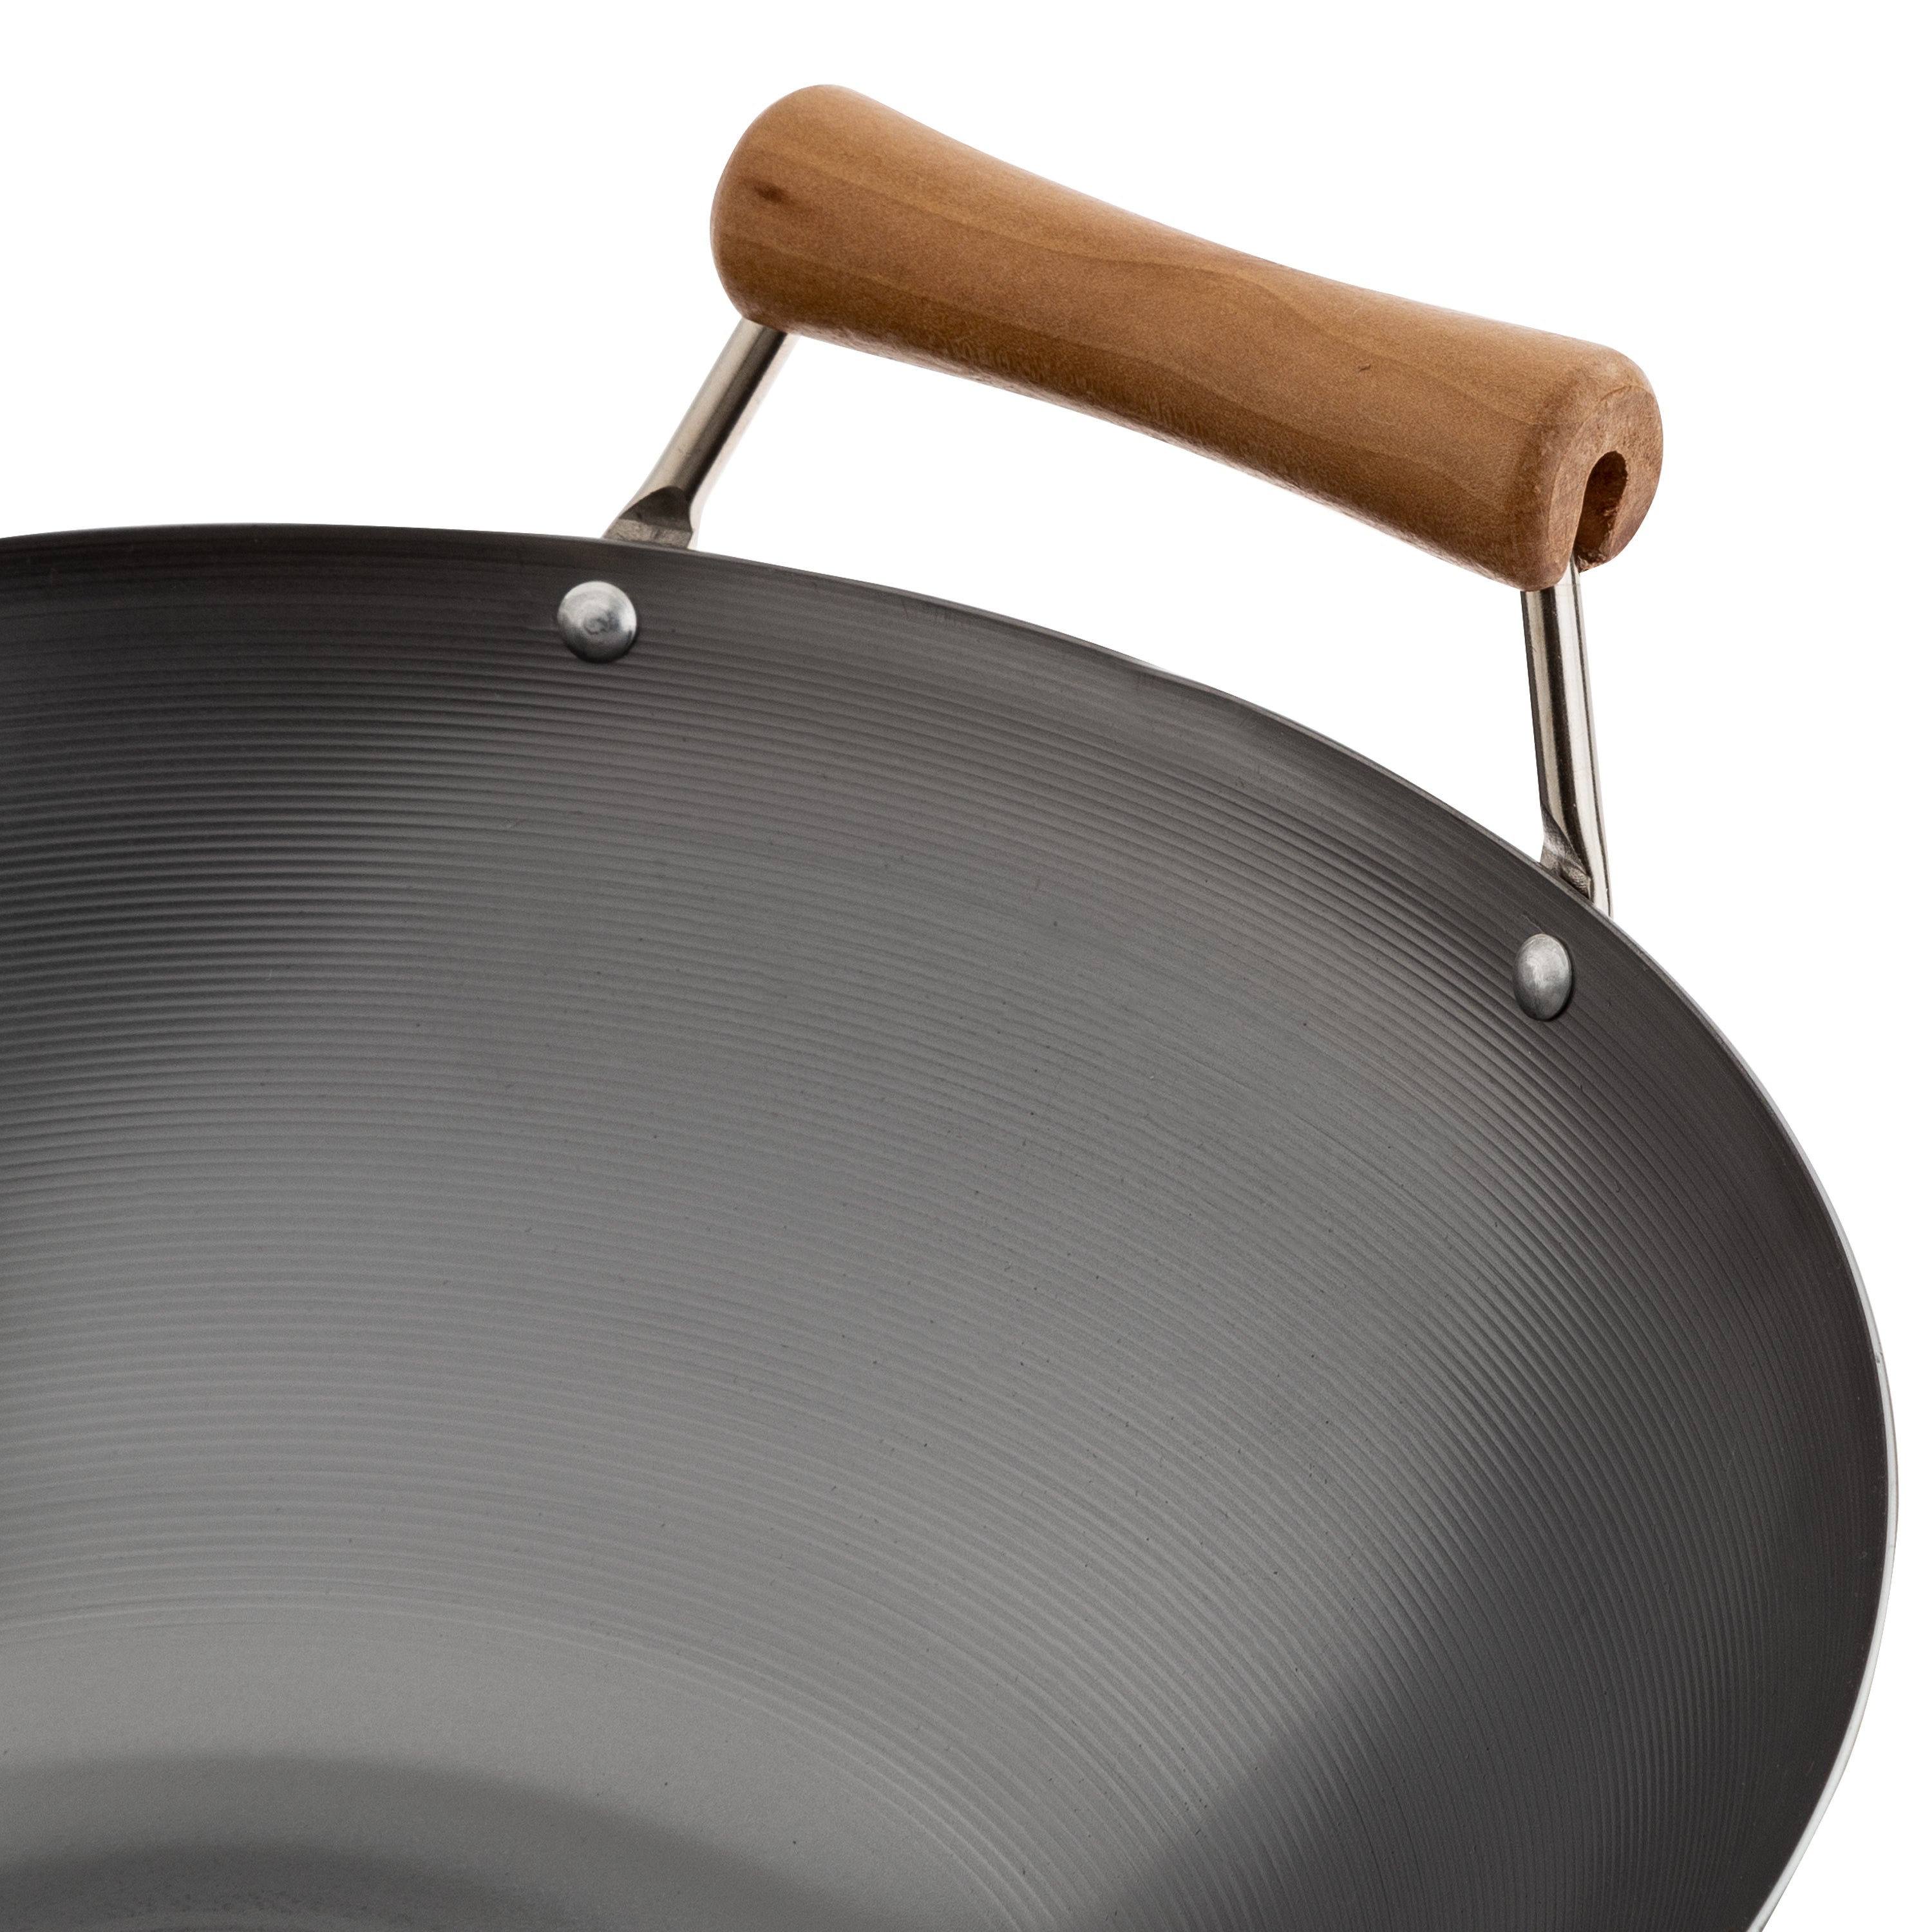 Classic Series 14-Inch Carbon Steel Flat Bottom Wok with Birch Handles